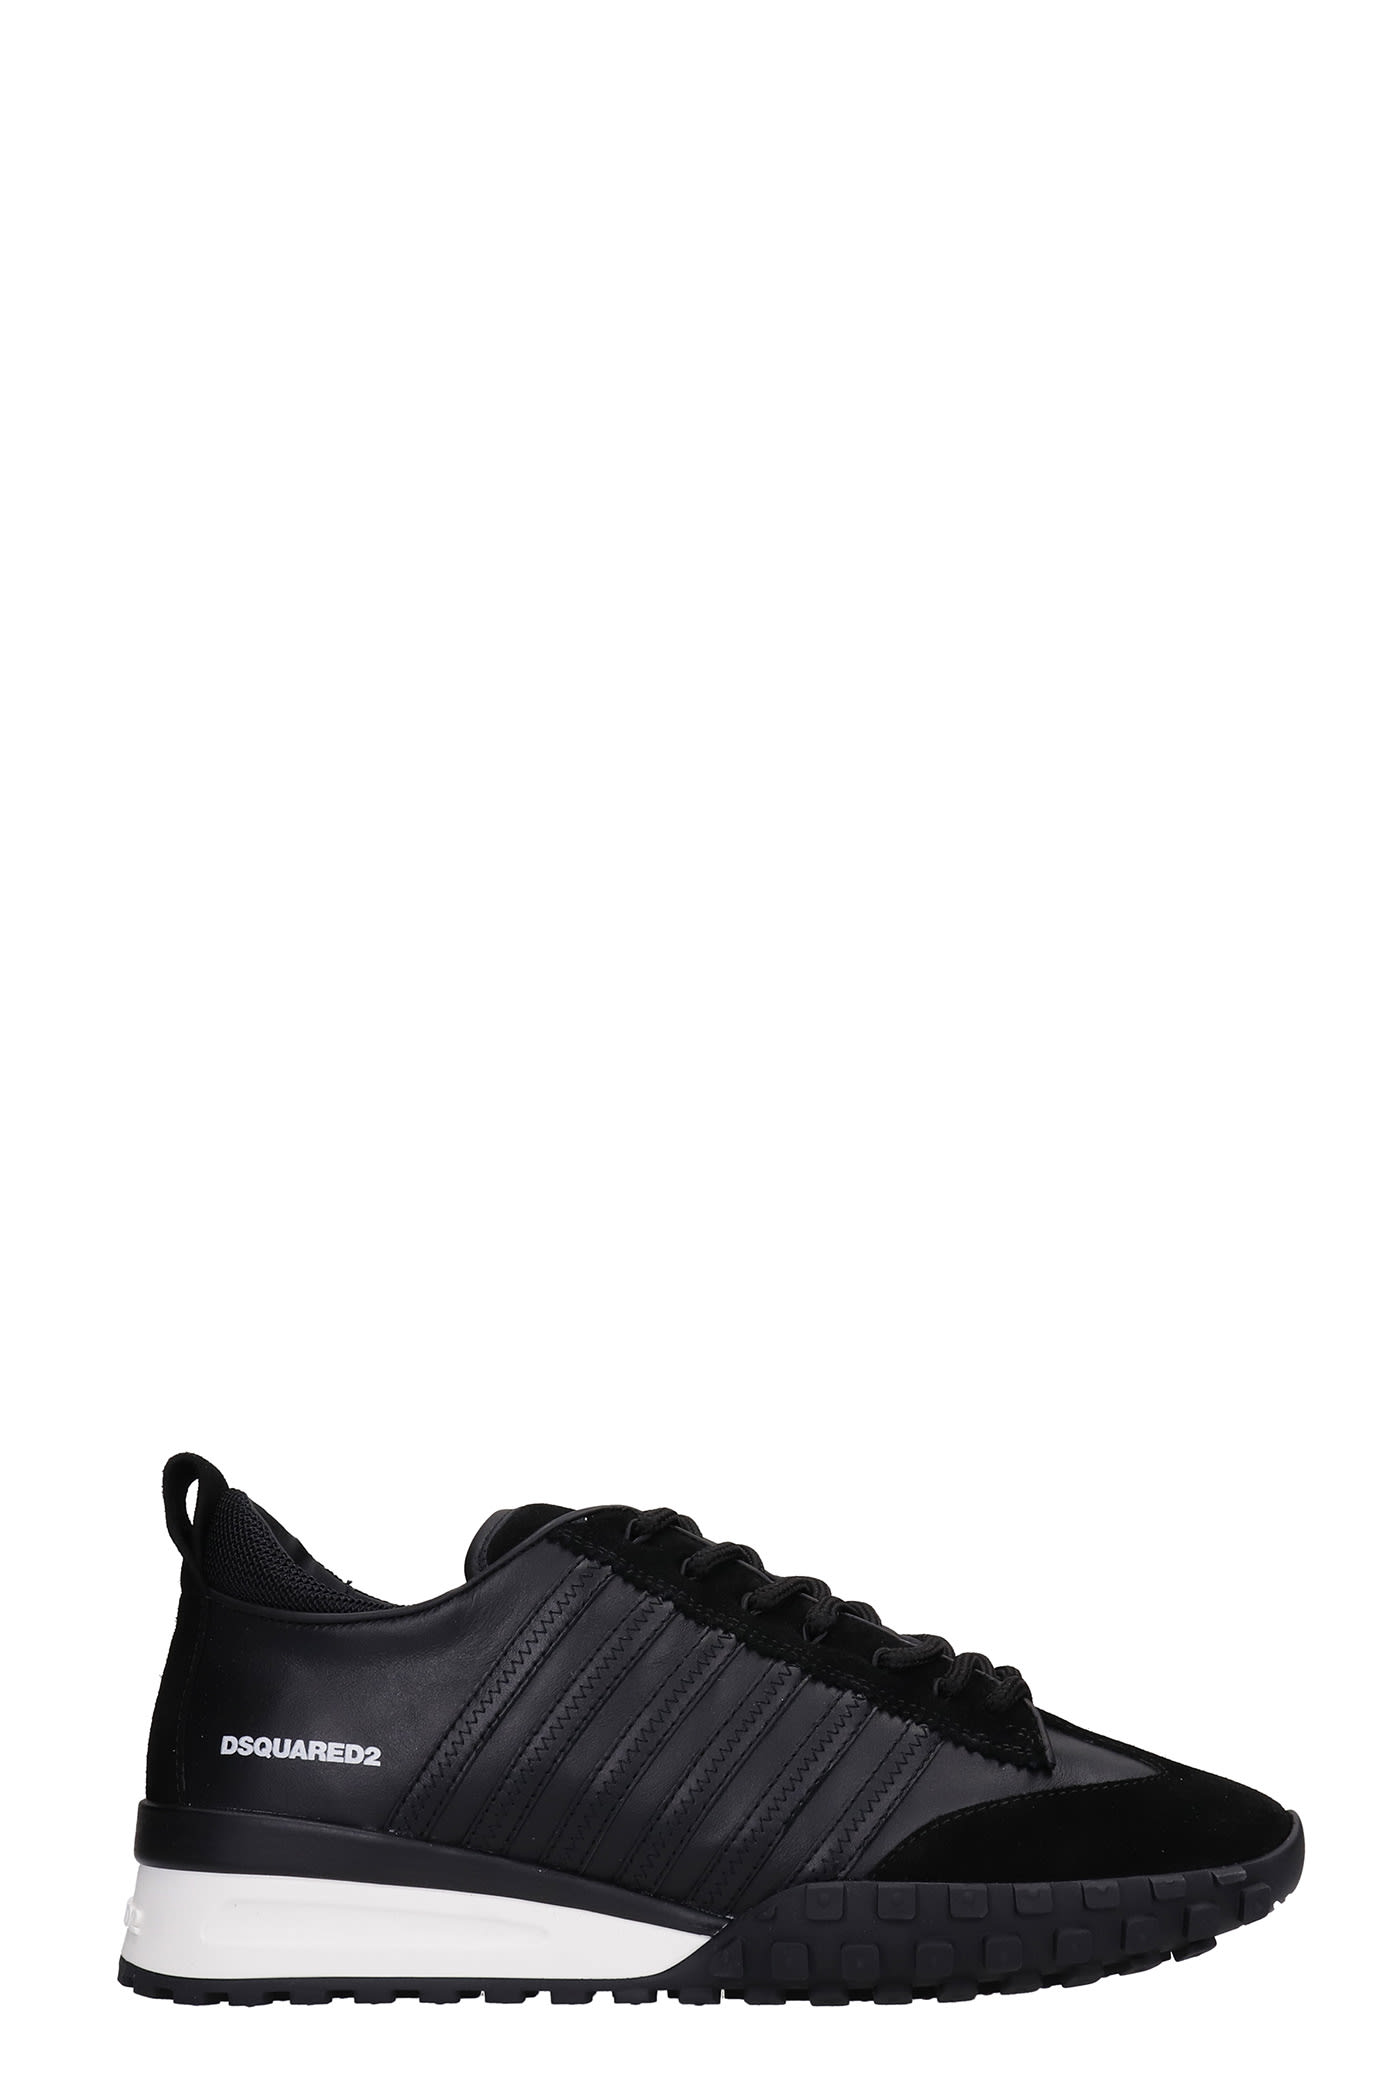 Dsquared2 Sneakers In Black Suede And Leather